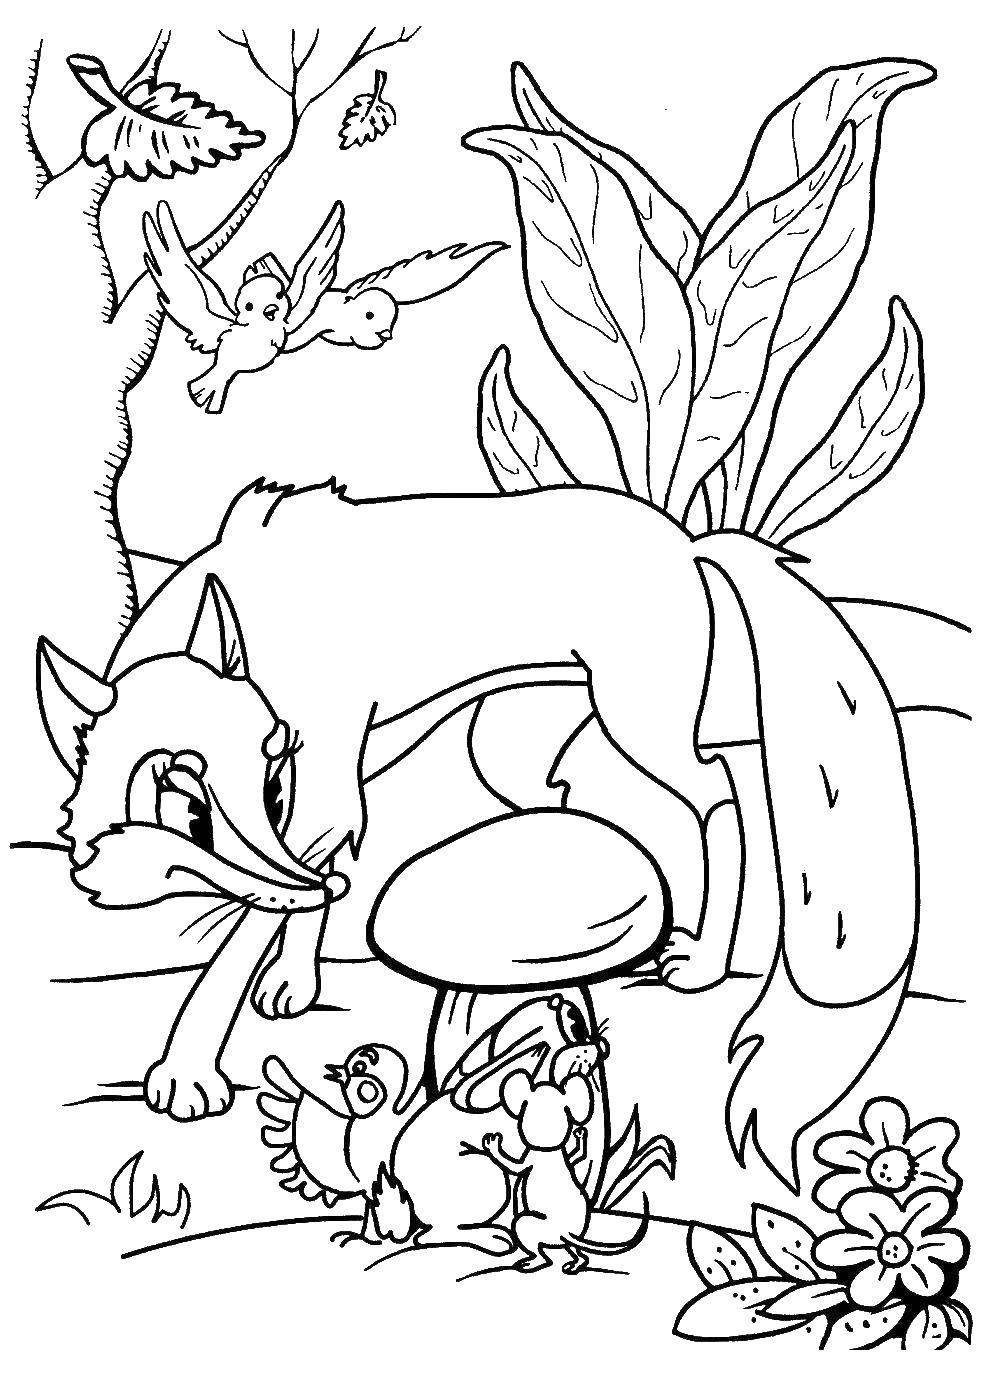 Coloring Fox is looking for a Bunny. Category Fairy tales. Tags:  Fox, hare.